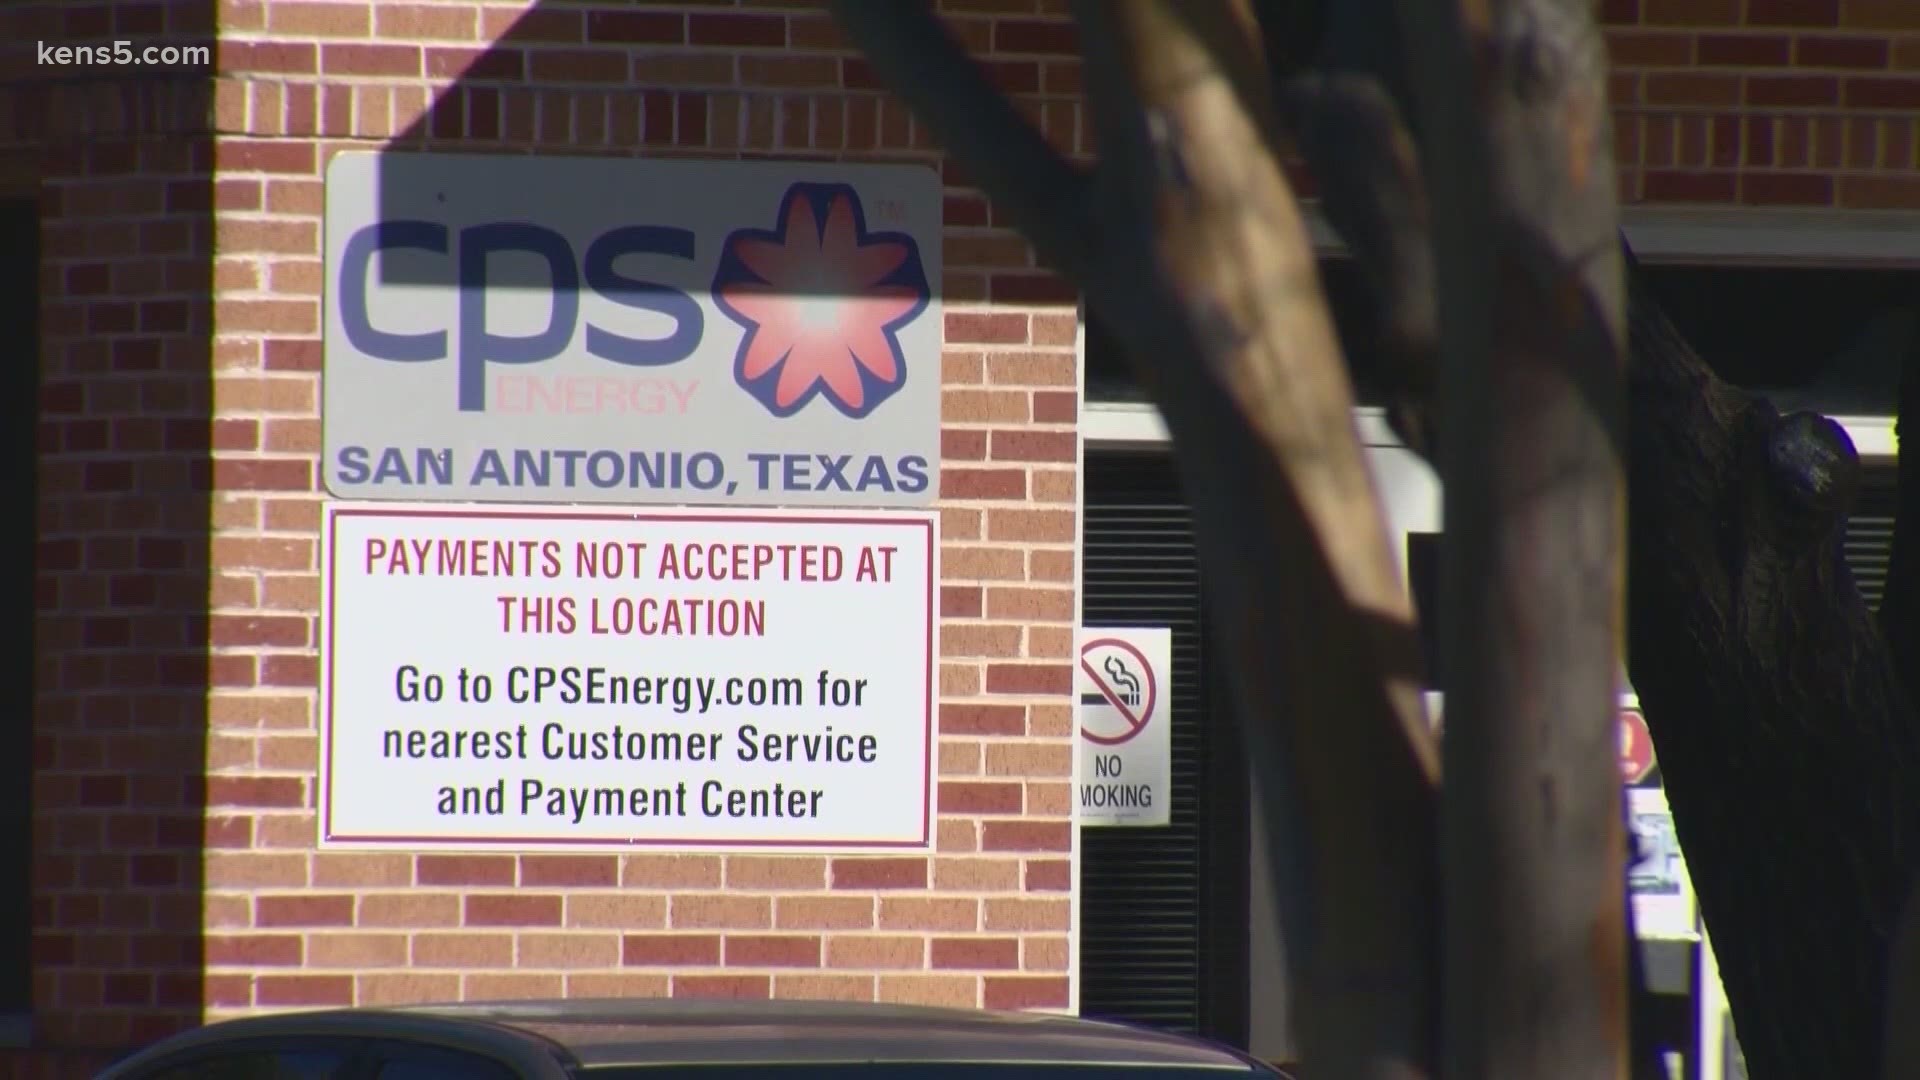 Nothing has been officially decided as of Tuesday, but CPS Energy higher-ups say they were aiming to resume disconnections in a few months.